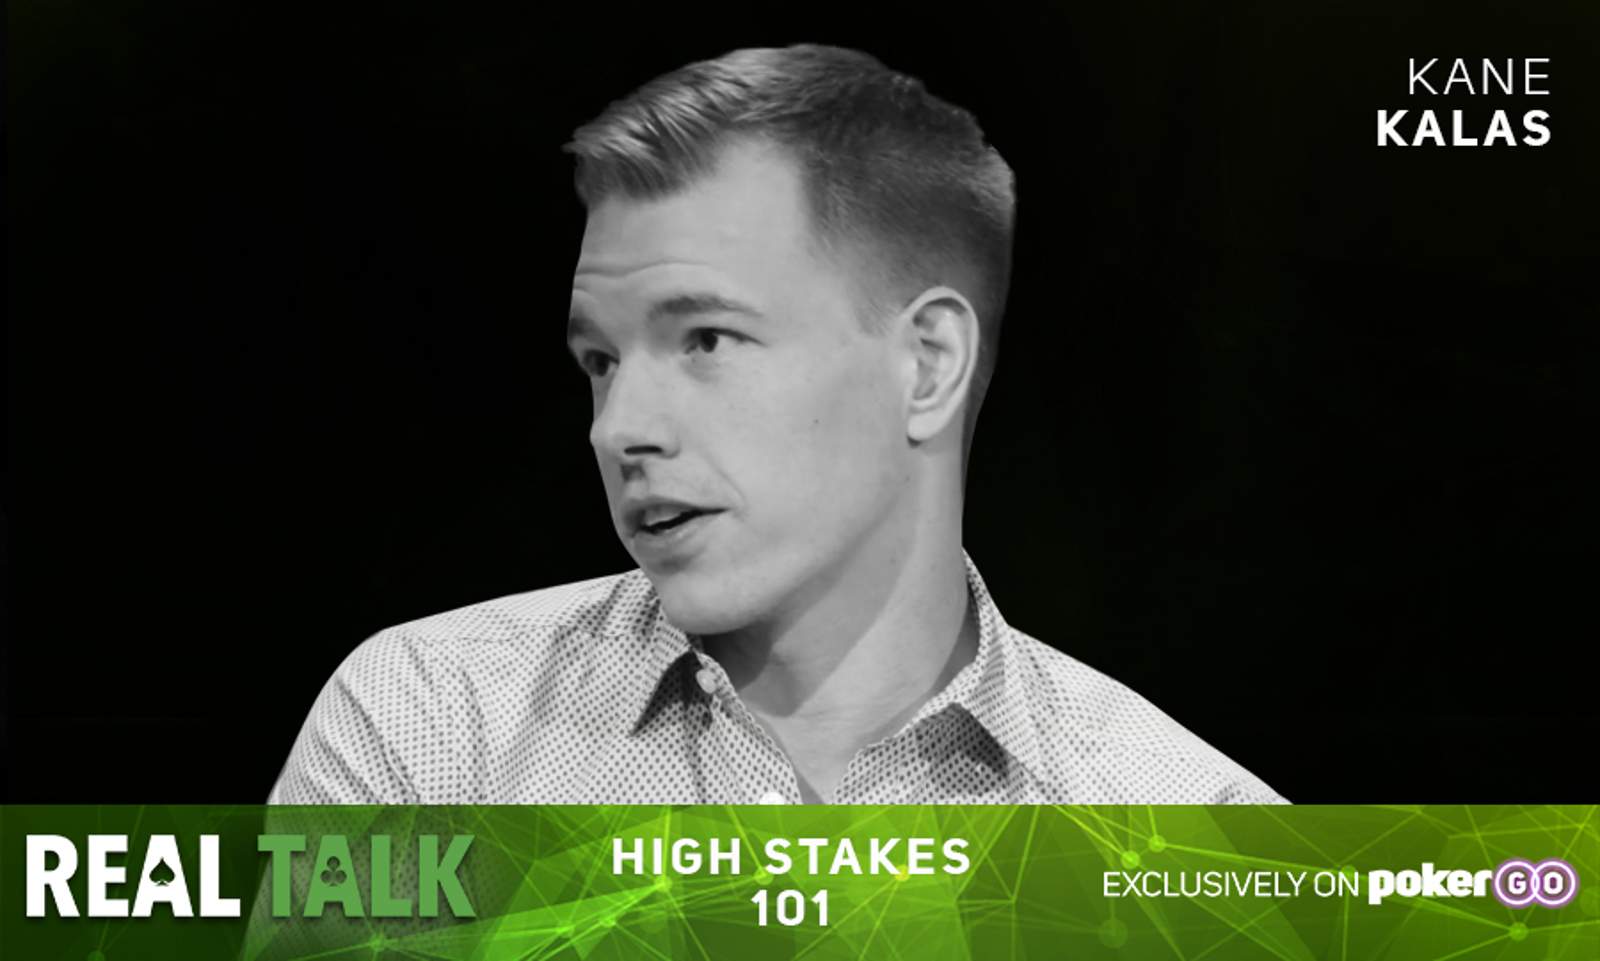 Real Talk – All Things High Stakes with Kane Kalas